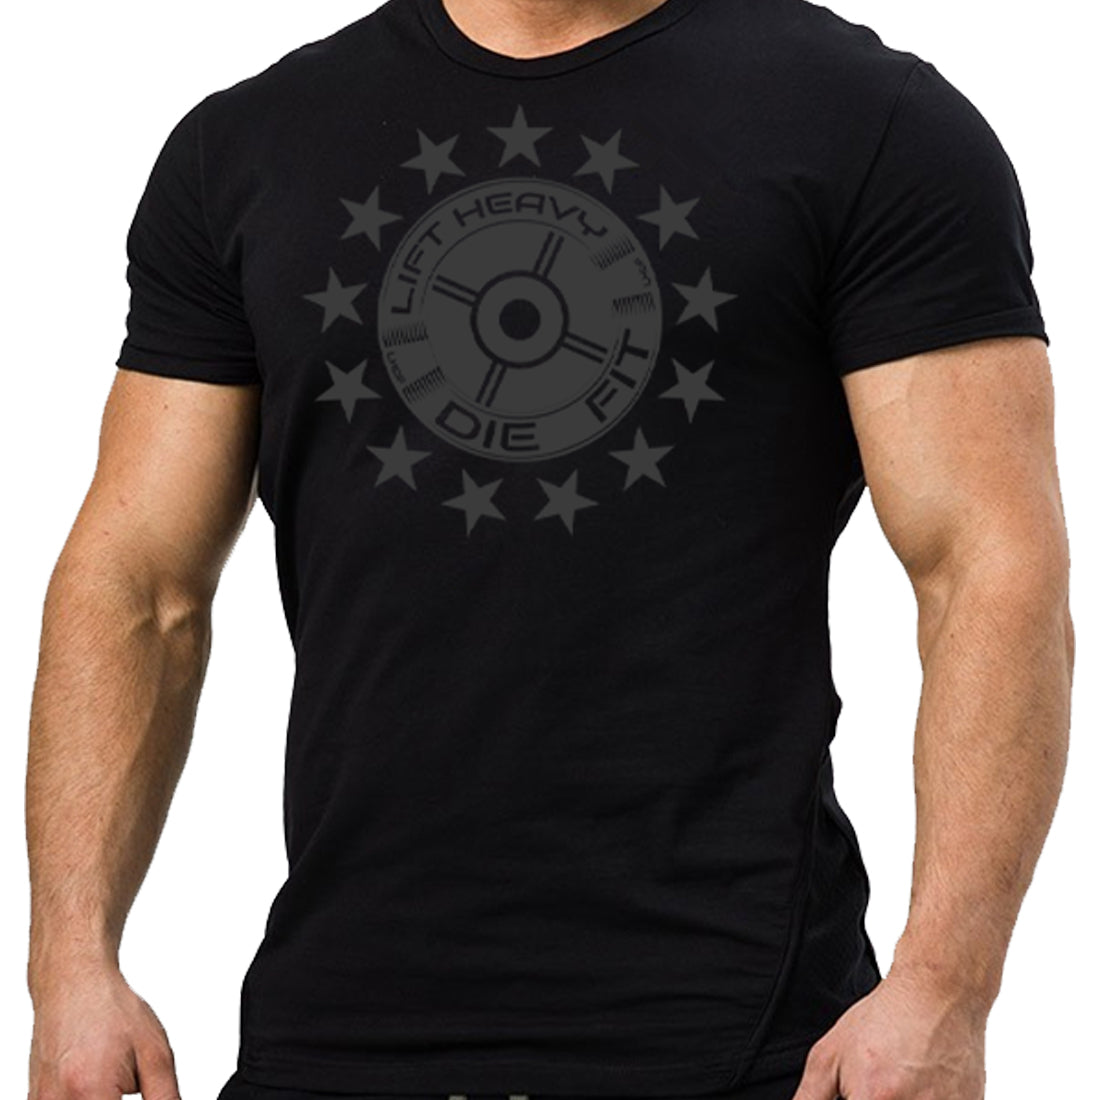 Unchain Your Strength with our 45lb Plate and Stars Unisex Shirt - The Ultimate Fitness Apparel for Gym-Goers and Athletes